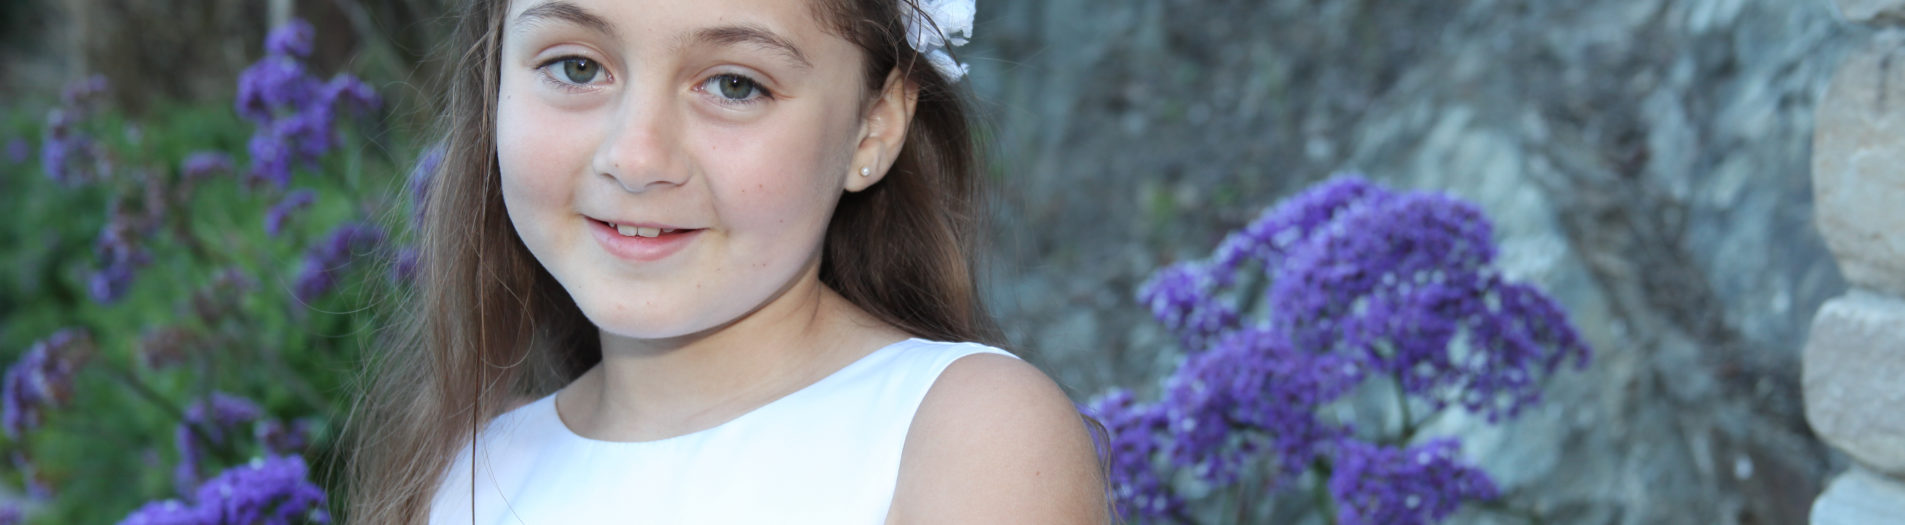 What does this girl need in her portrait session? | First Communion Portraits